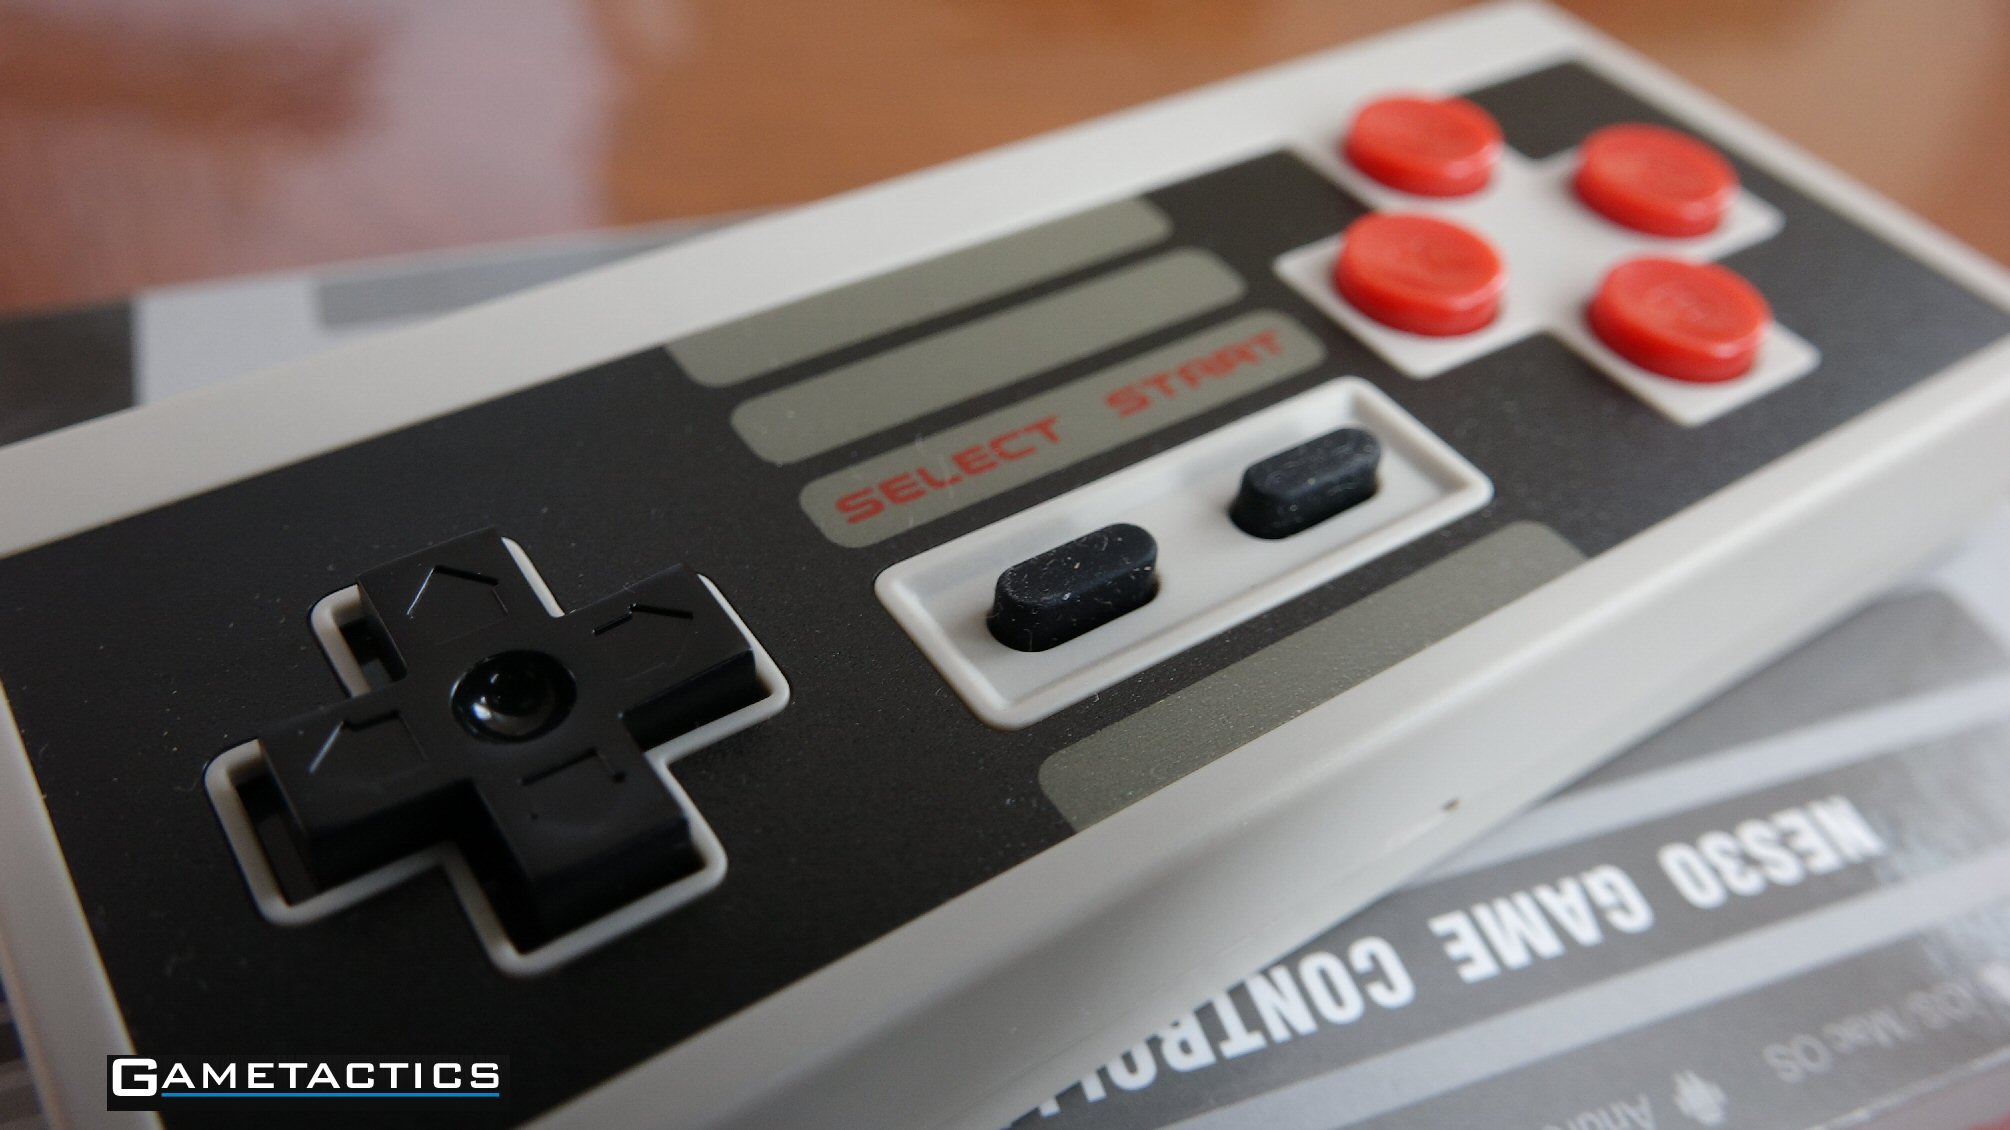 NES30 Bluetooth Controller Review – Android, iOS, Wii U / Wii and Windows PC